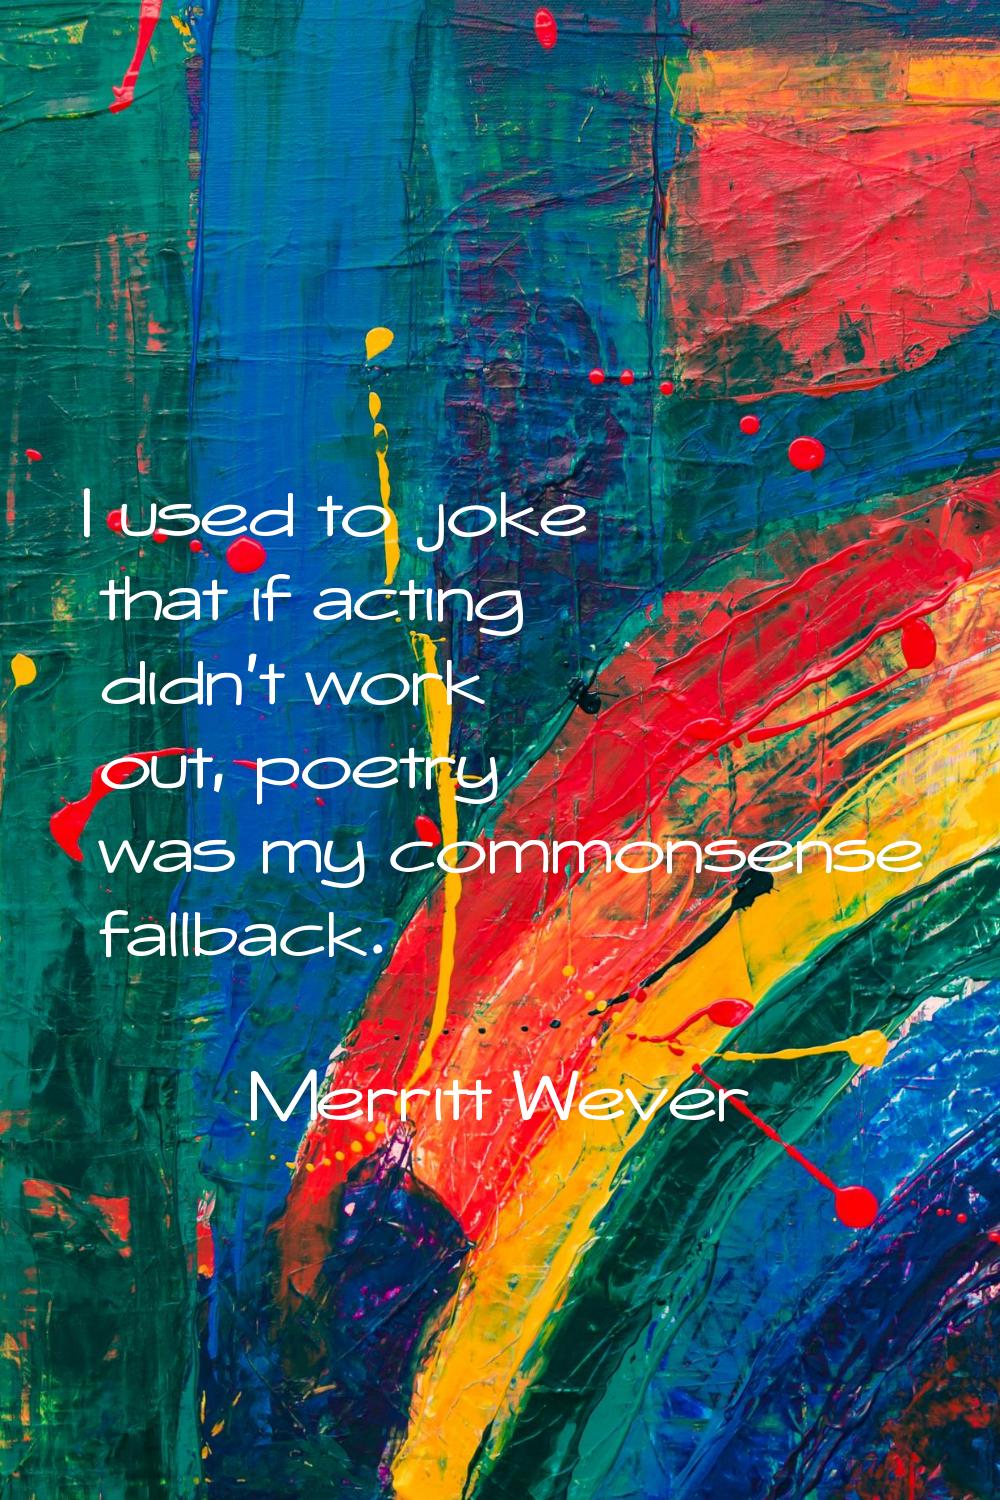 I used to joke that if acting didn't work out, poetry was my commonsense fallback.